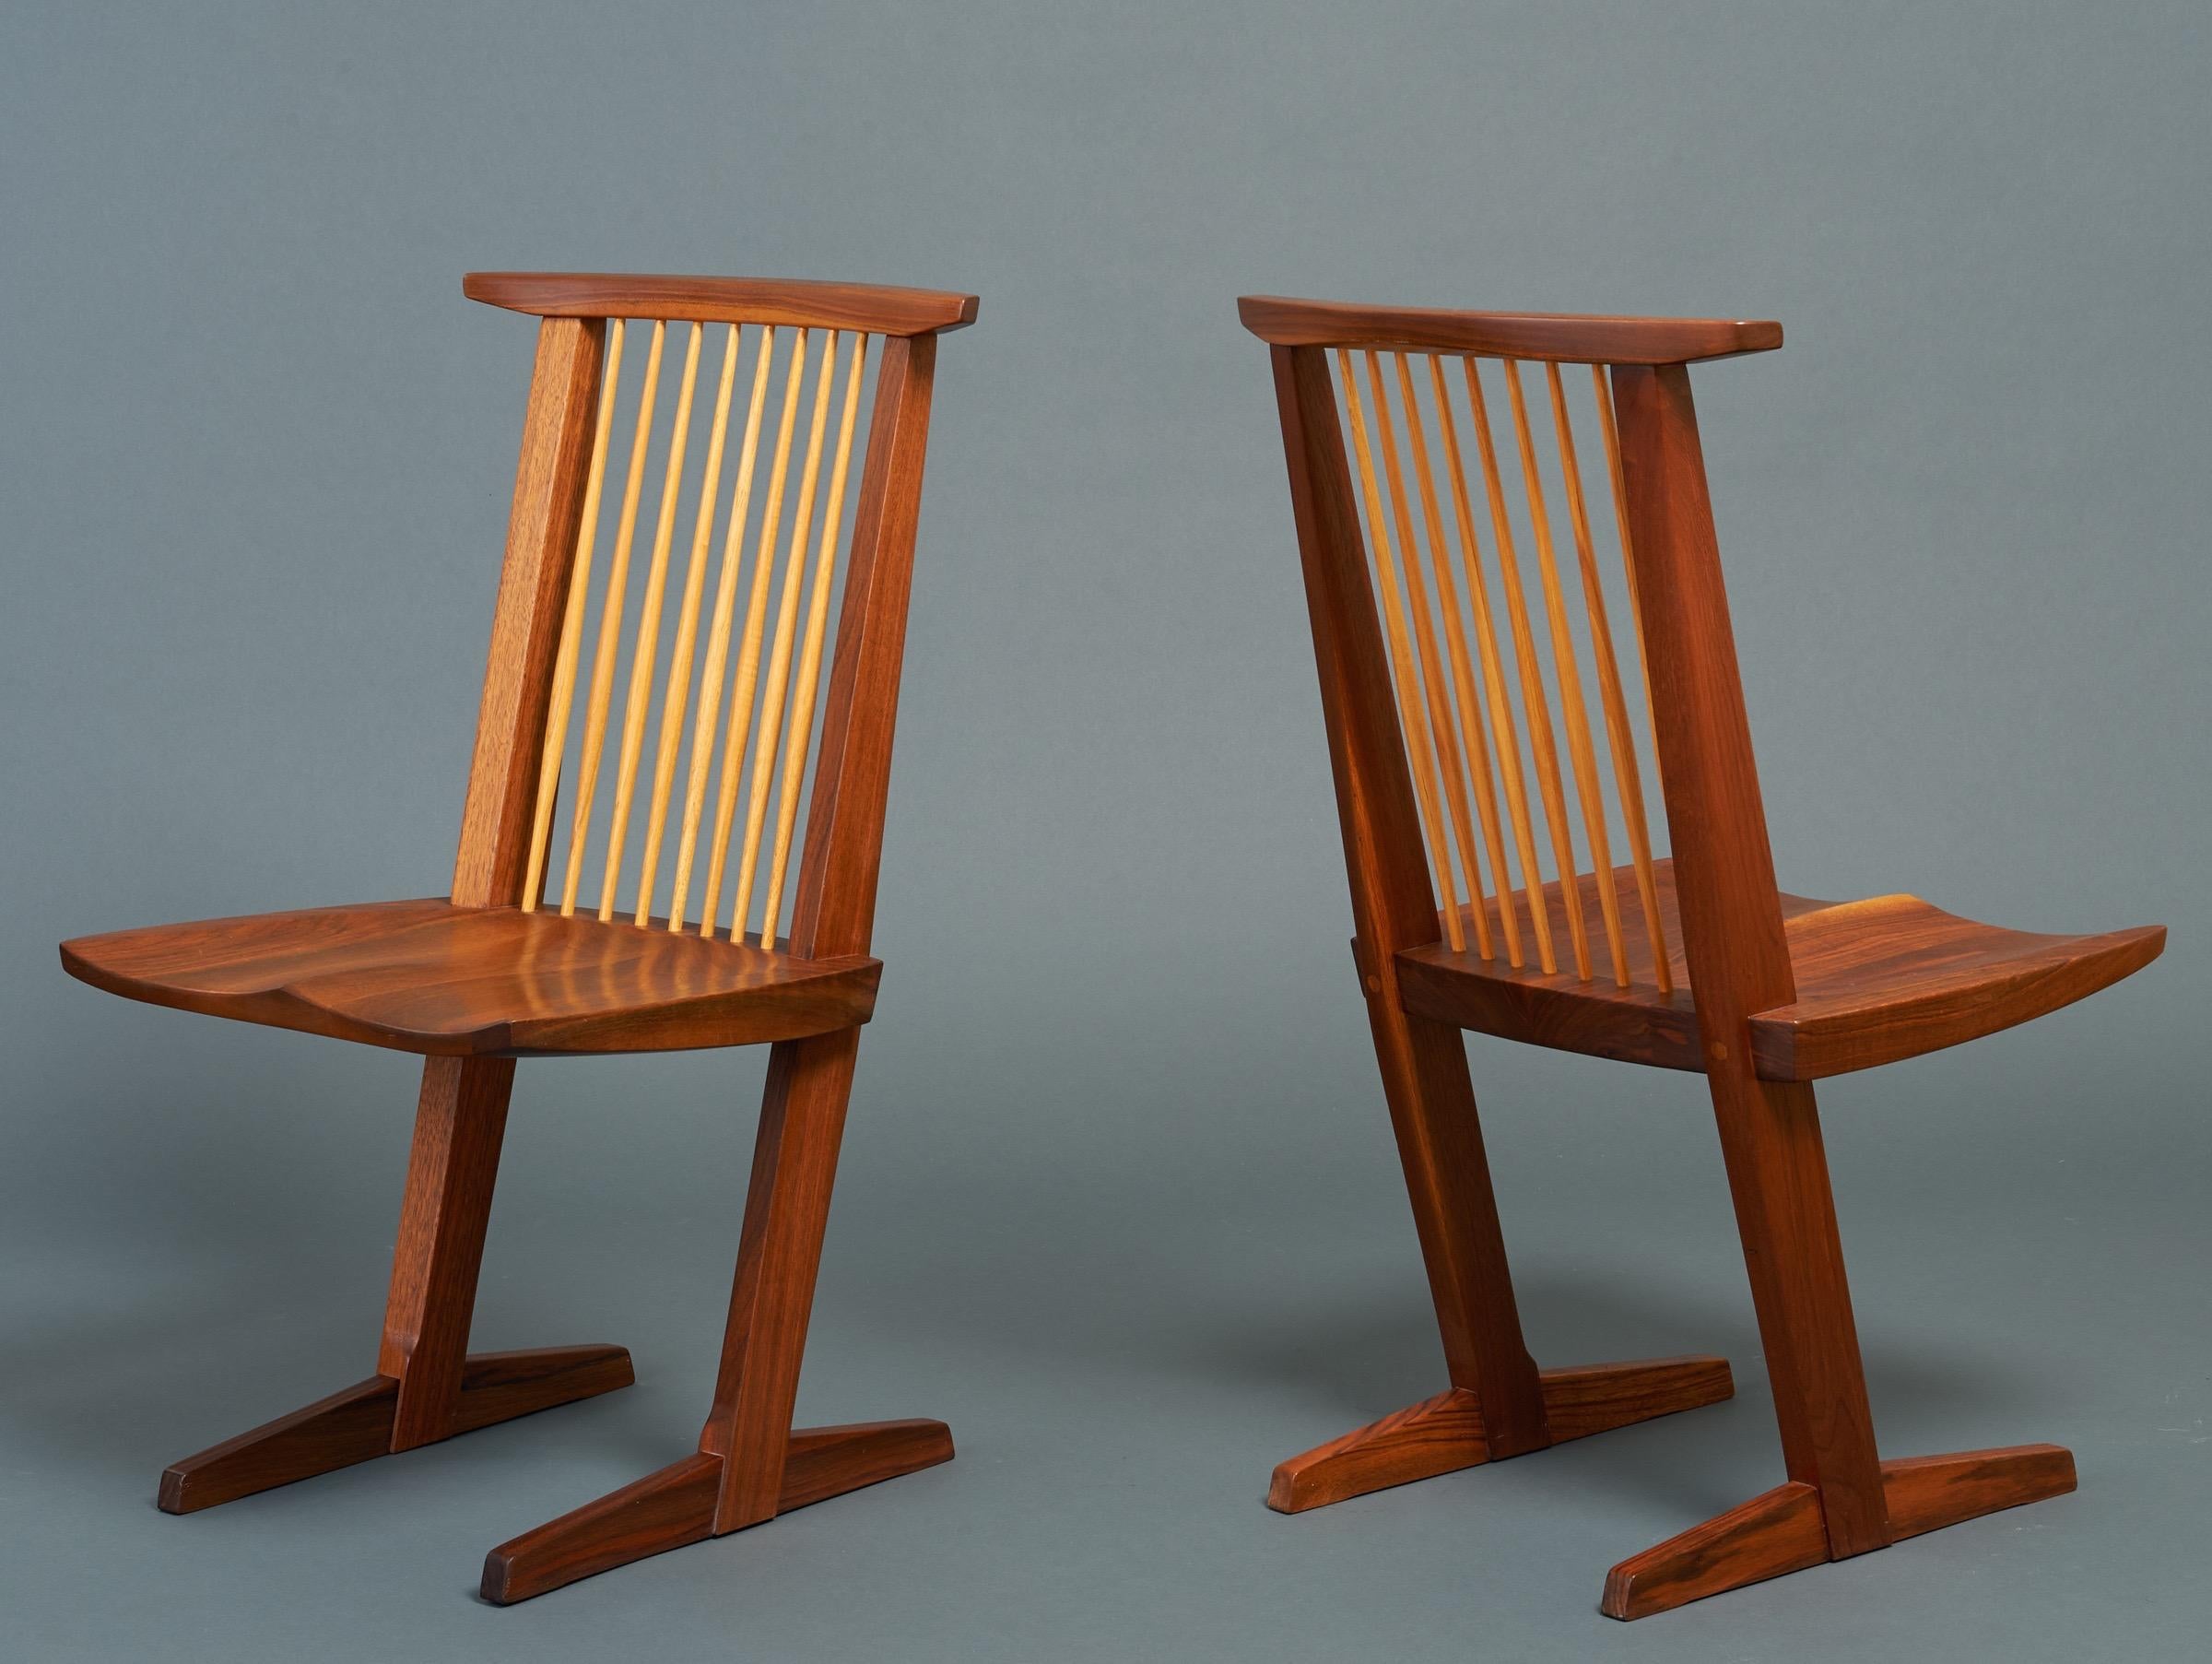 George Nakashima (1905–1990) 

An exceptional pair of Conoid chairs by Pennsylvania studio craft movement patriarch George Nakashima, among the last he sculpted before his death. In carved black walnut shot through with a tactile red and blond